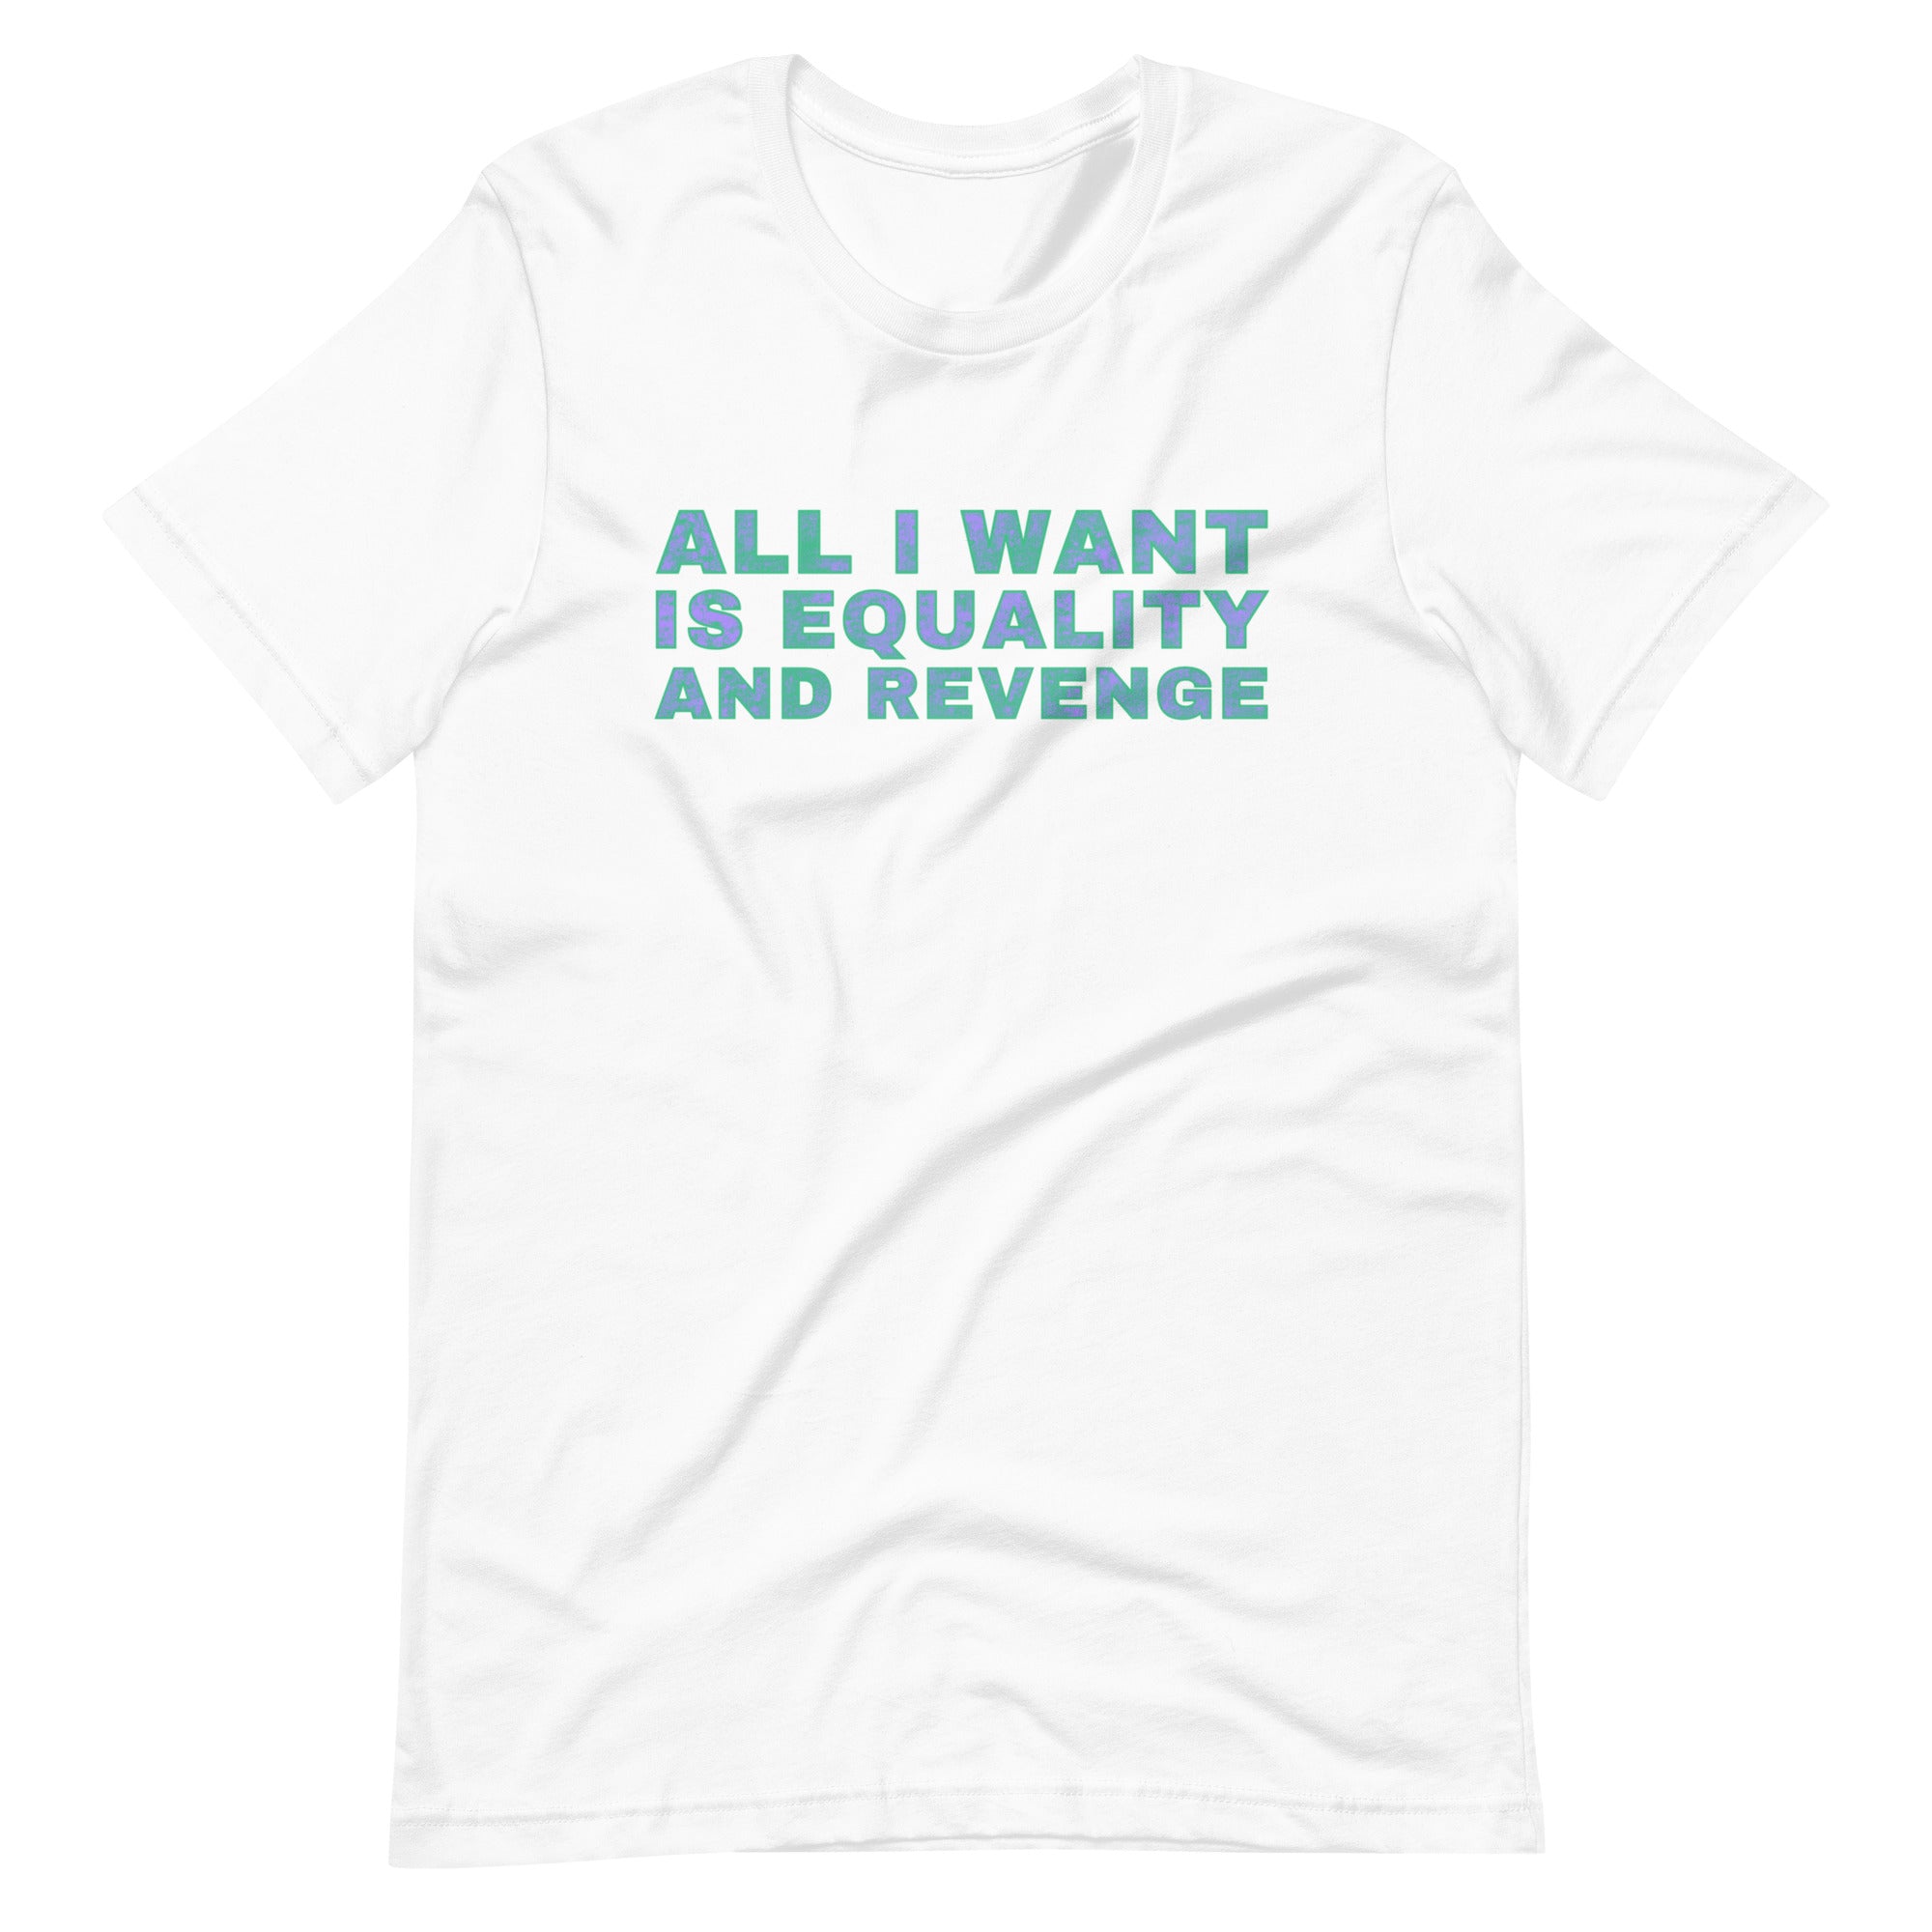 White feminist t-shirt featuring the phrase 'All I Want is Equality and Revenge,' a women’s rights shirt advocating for justice, a powerful feminist t-shirt for a cause